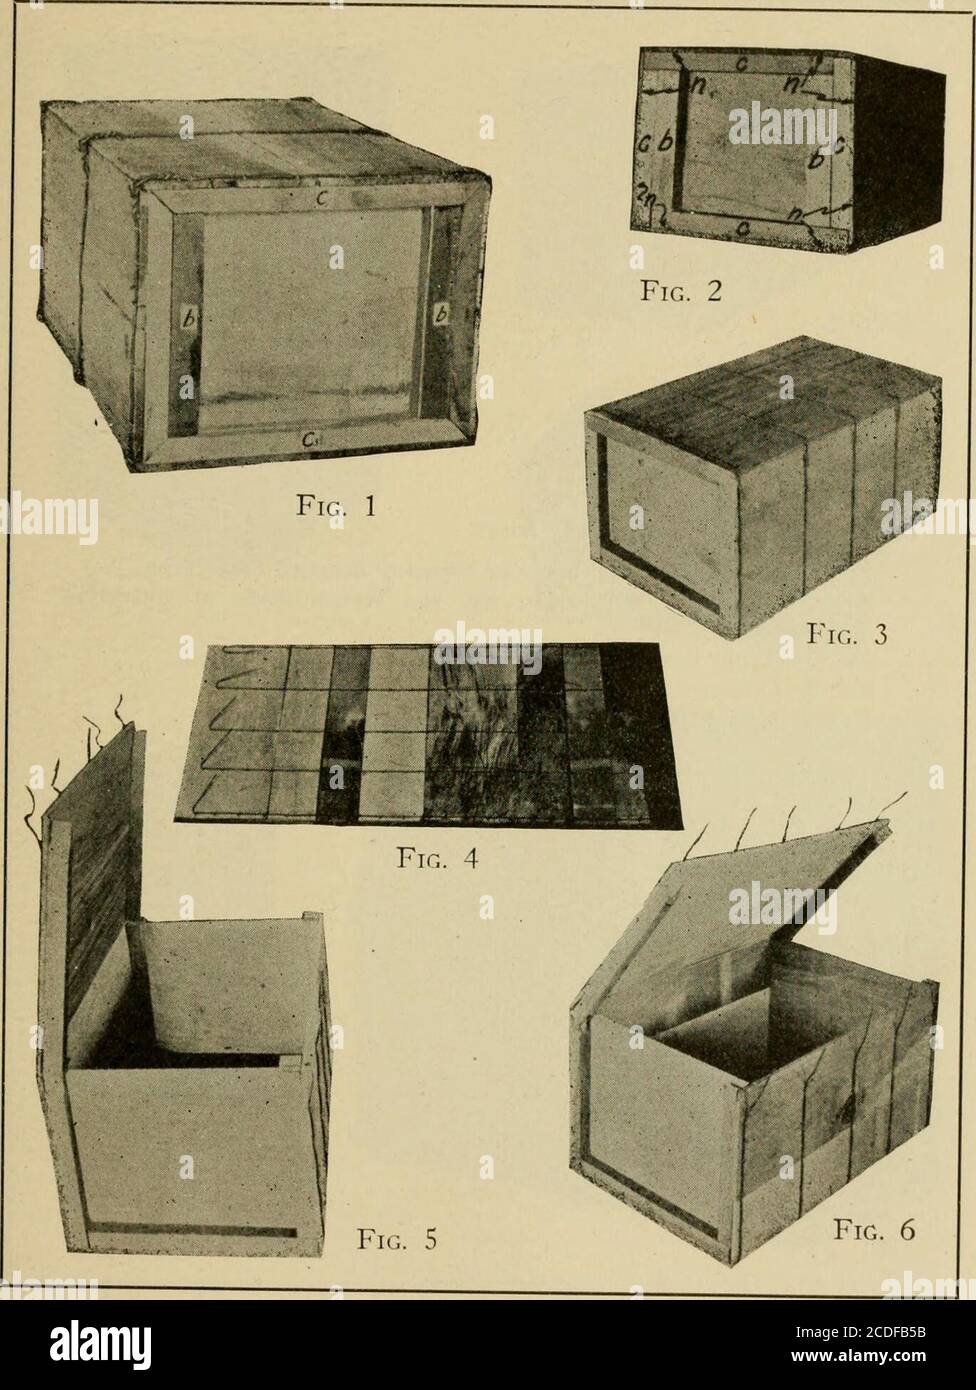 . Wooden box and crate construction . Fig. 2 Fig. 4 176 WOODEN BOX AND CRATE CONSTRUCTION Plate VIII—Wirebound boxes. Fig. 1—Fassnacht box—note method of joining the wires at the corners.Fjg. 2—Method of reinforcing battens, (c) Regular cleats with mortised and tenoned joints, (b) Battens, (n) Cement-coated (7d) nails.Fig. 3—4-one wirebound box closed for shipment. Note position and character of twists for uniting the binding wires.Fig. a—The outer surface of a mat for a 4-one box.Fig. 5—4-one box with inside liners or corner cleats.Fig. 6—4-one wirebound box assembled. APPENDIX 77 Pl.ATK VI Stock Photo